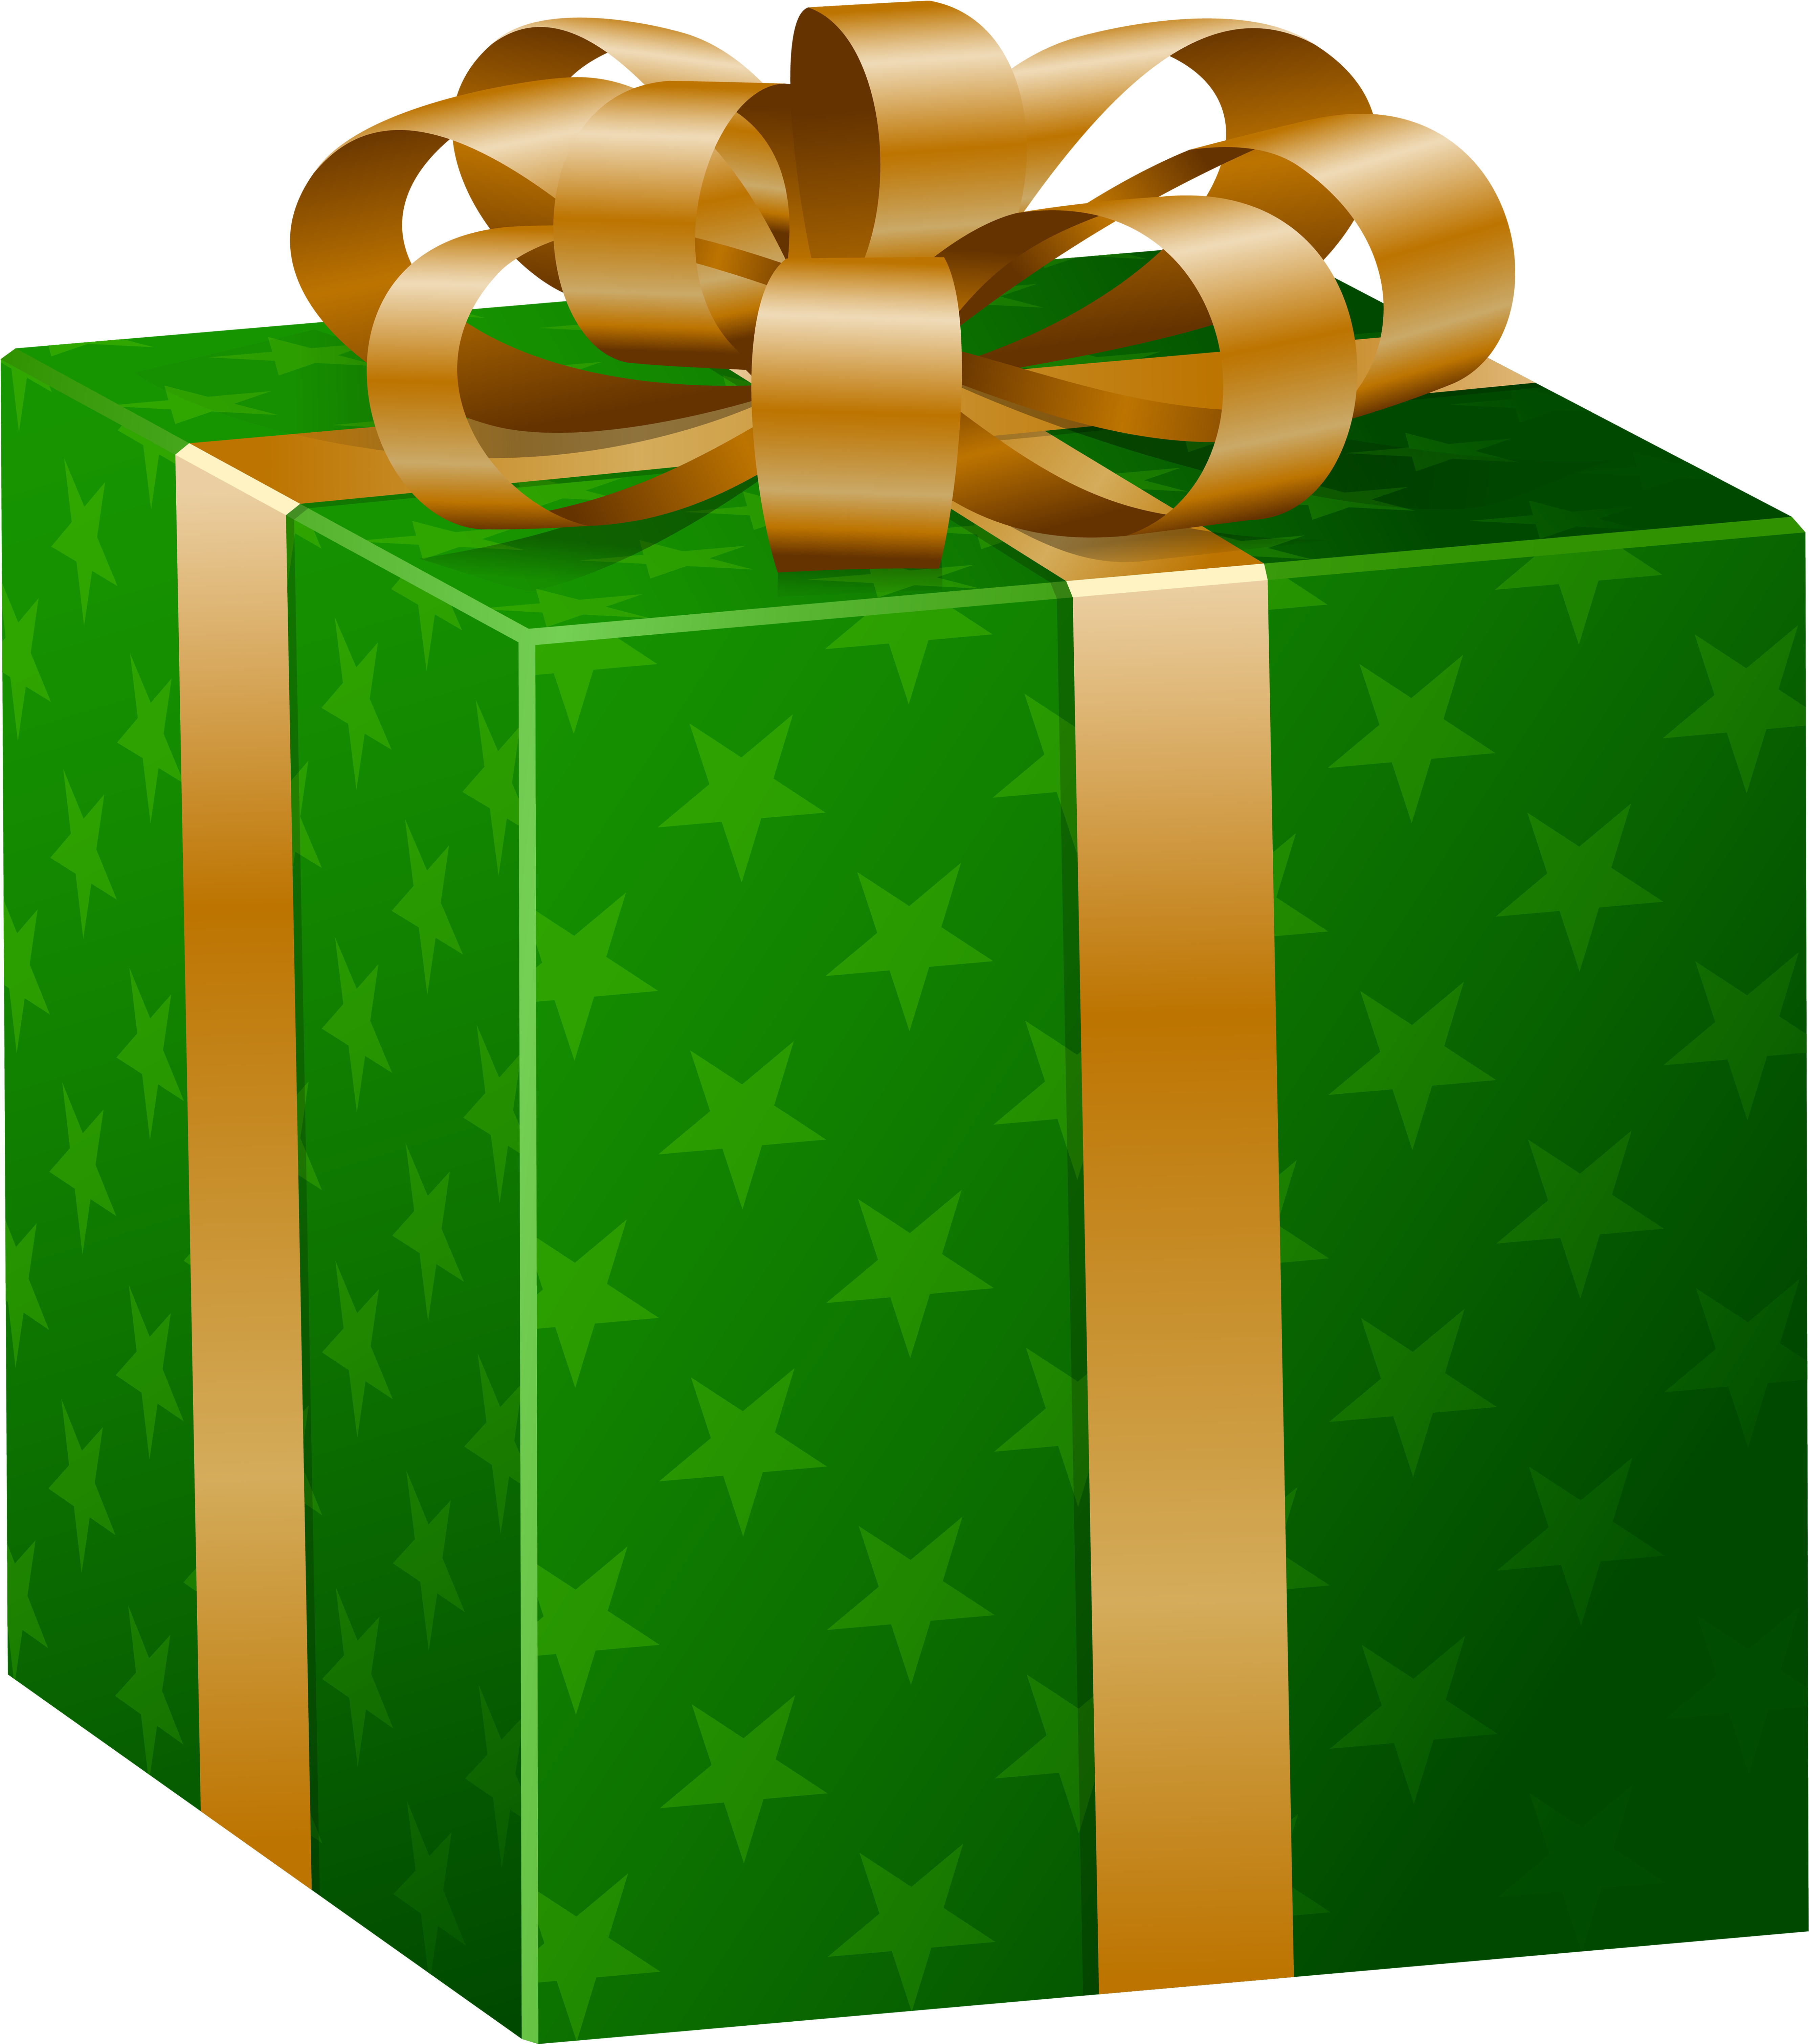 Gifts clipart green, Gifts green Transparent FREE for download on